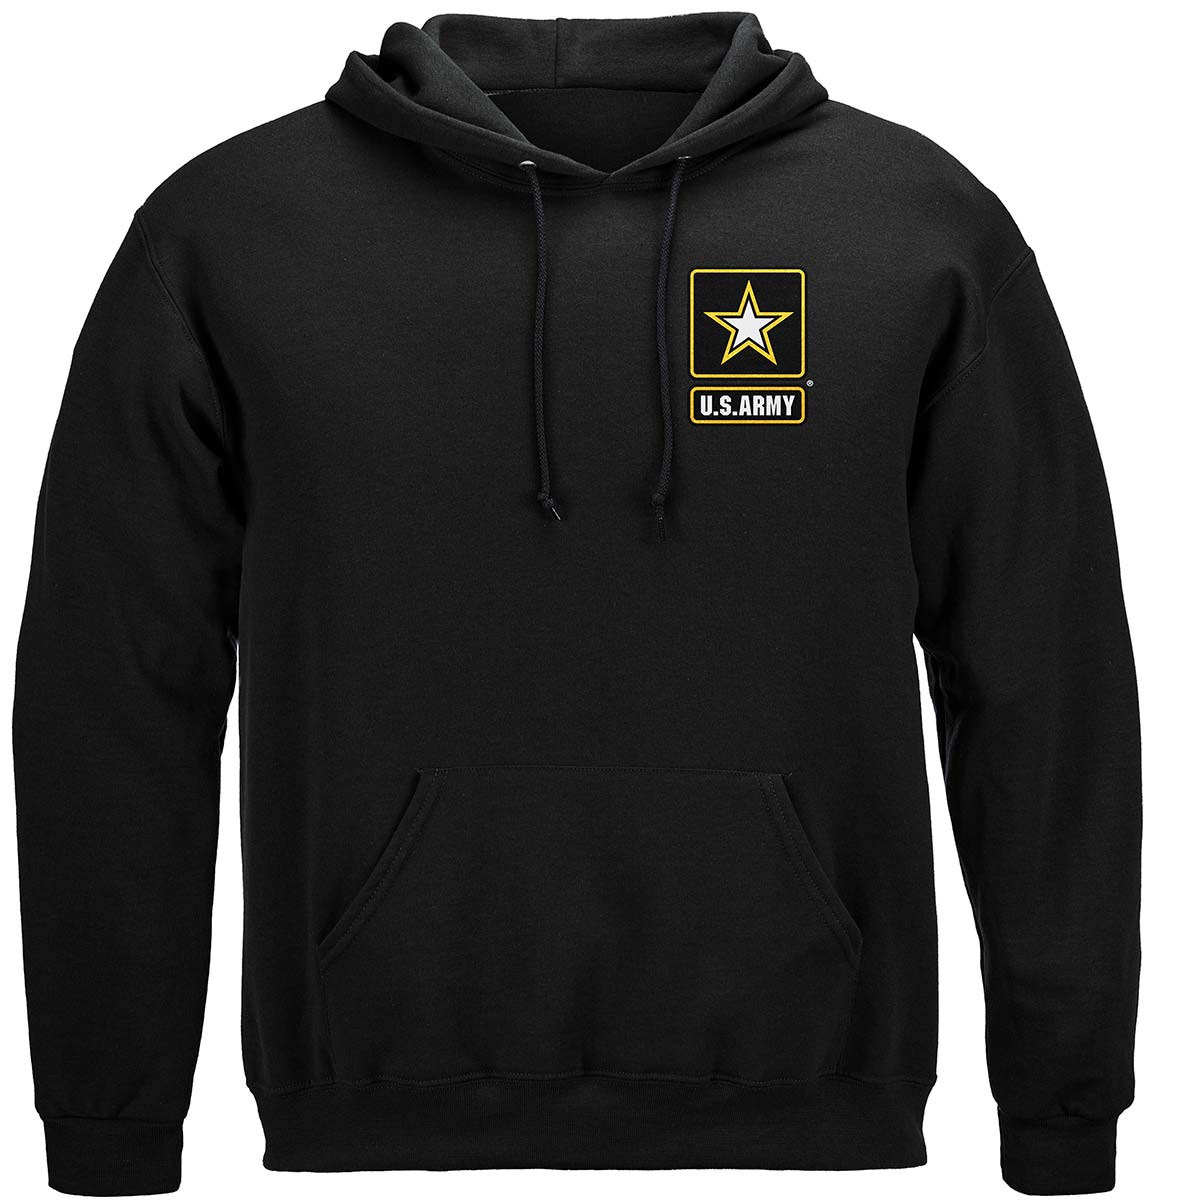 Army Strong Helicopter Solider Premium T-Shirt